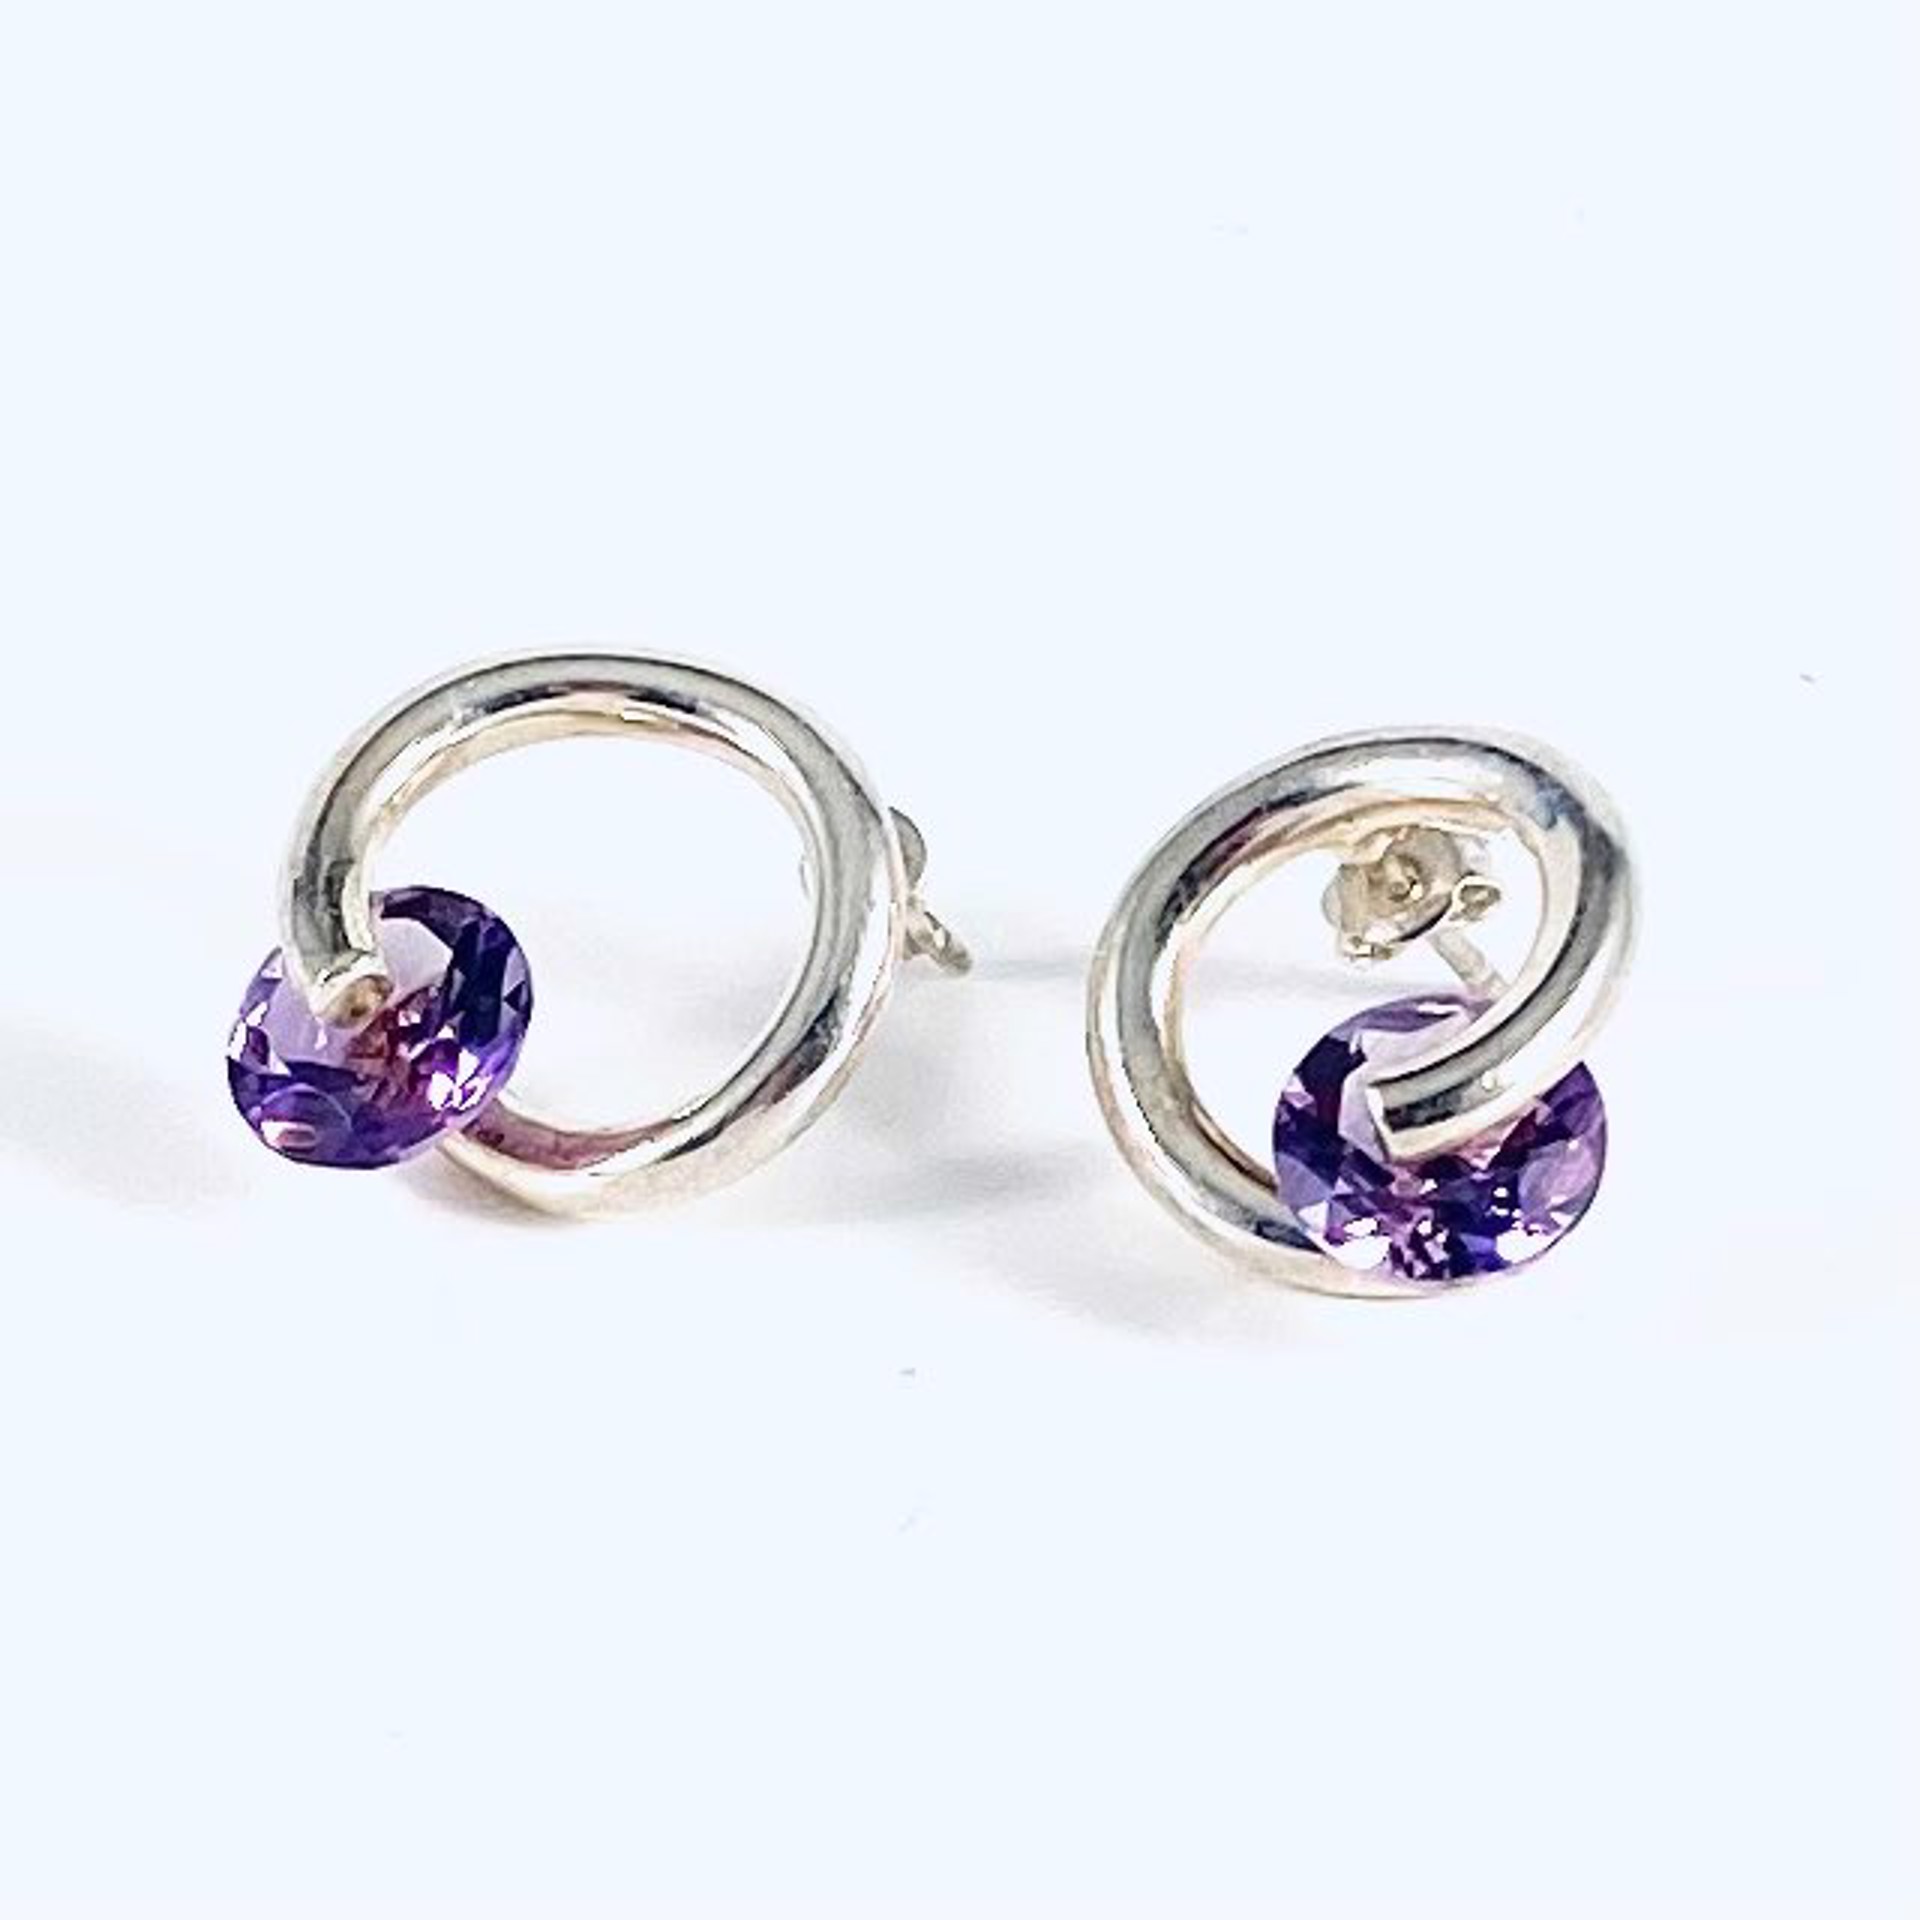 Suspended Faceted Round Amethyst Post Earrings BORA22-3 by Bora